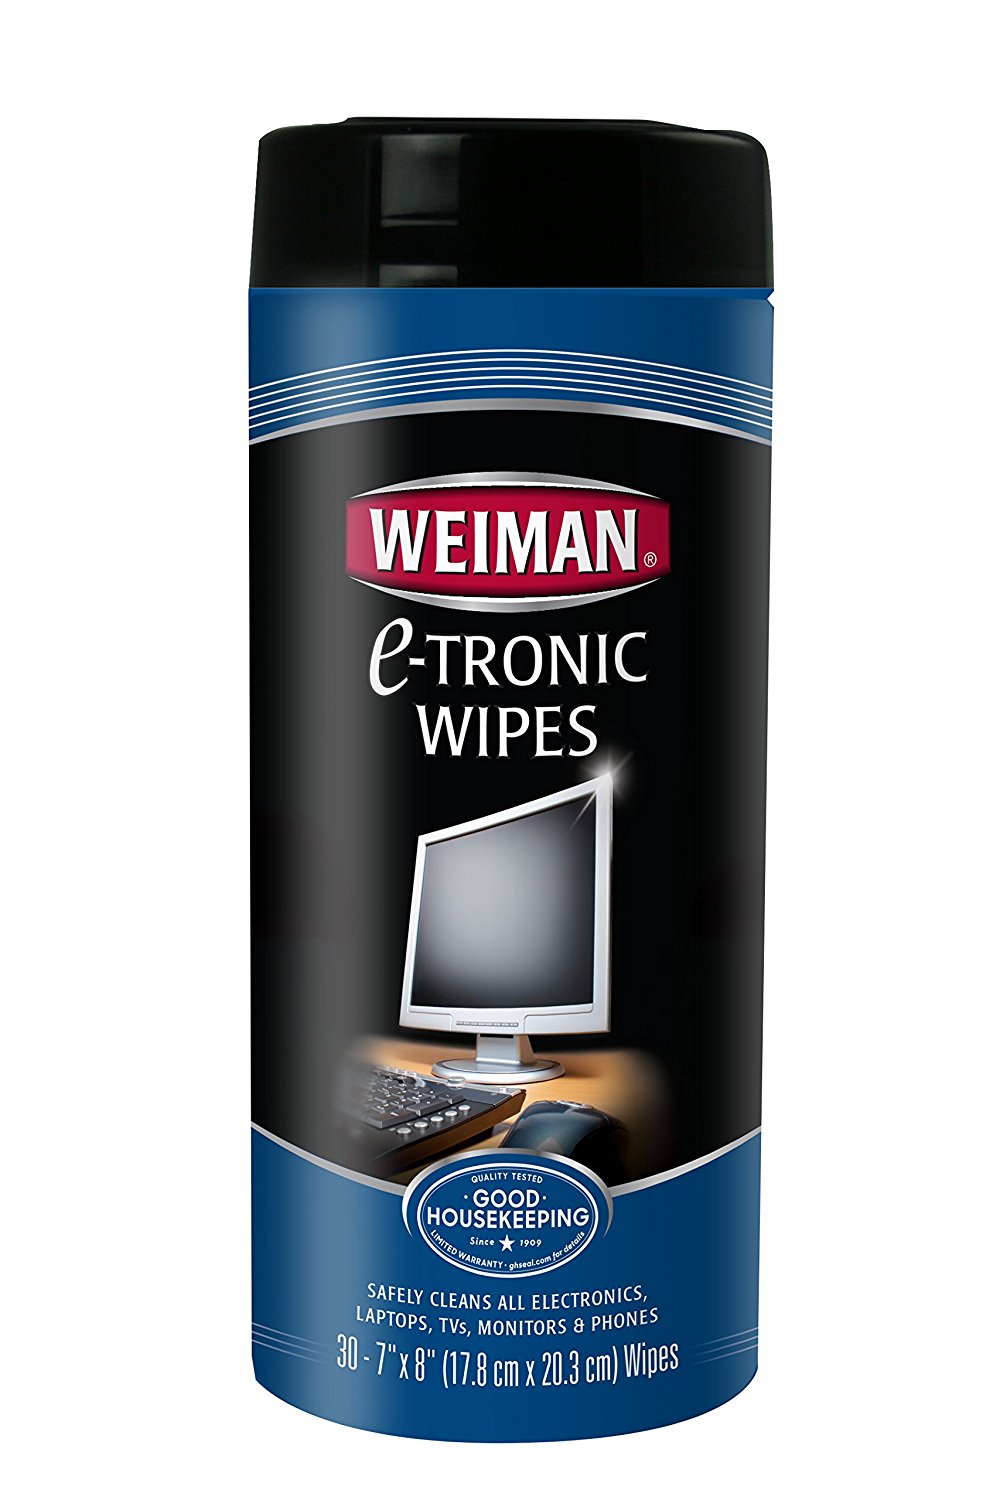 Weiman Stainless Steel Cleaning Wipes, 30 Count 